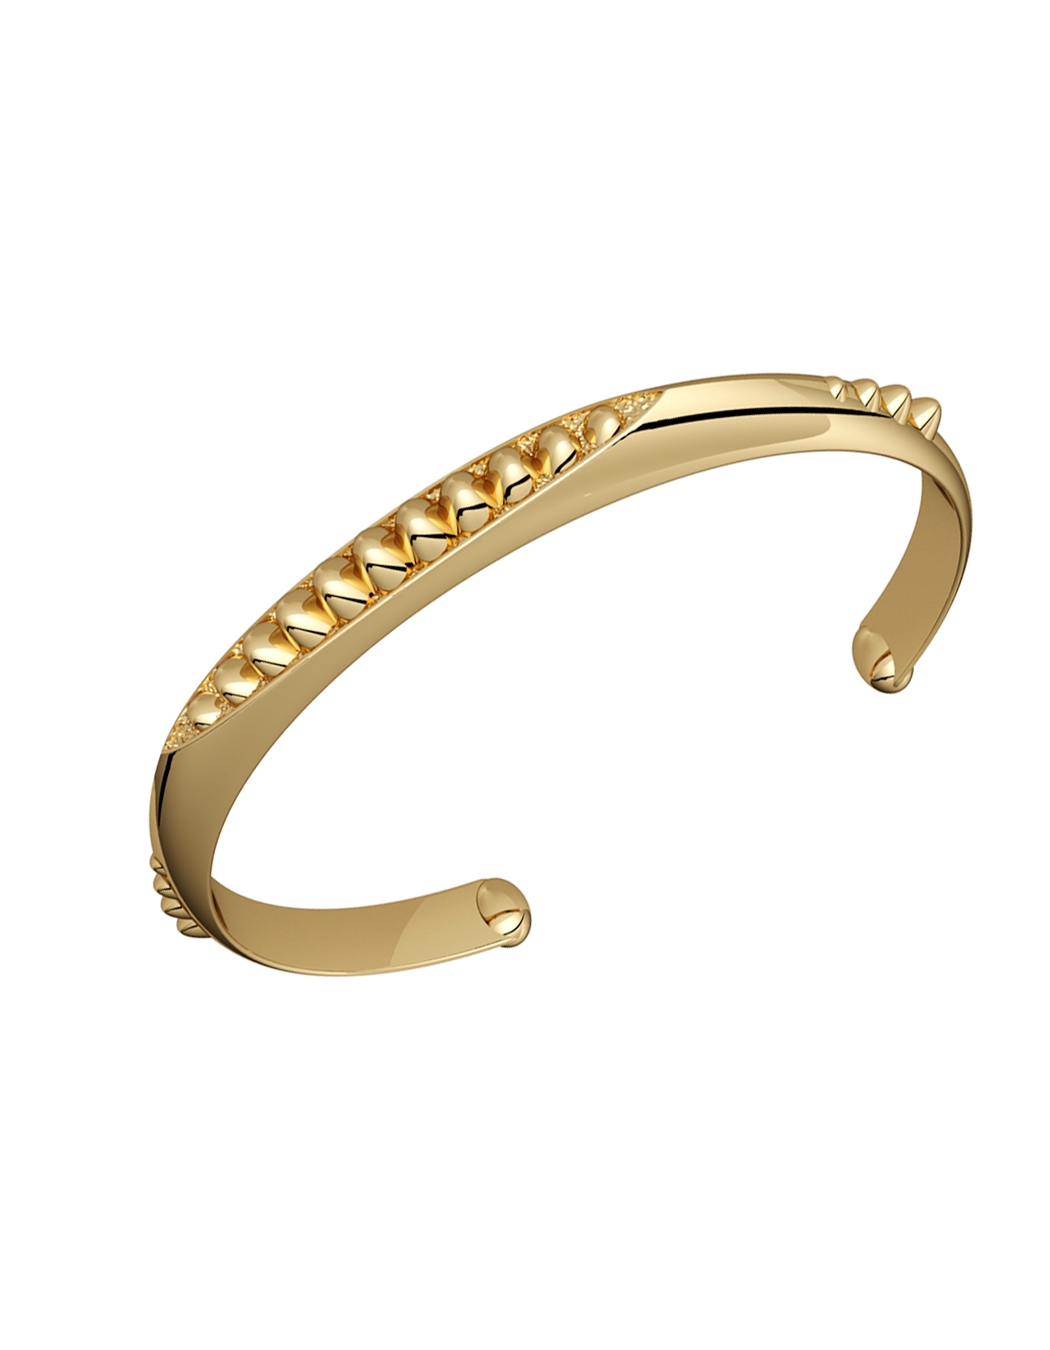 14k Solid Yellow Gold Spike Design Spear Cable Cuff Bangle Bracelet 7